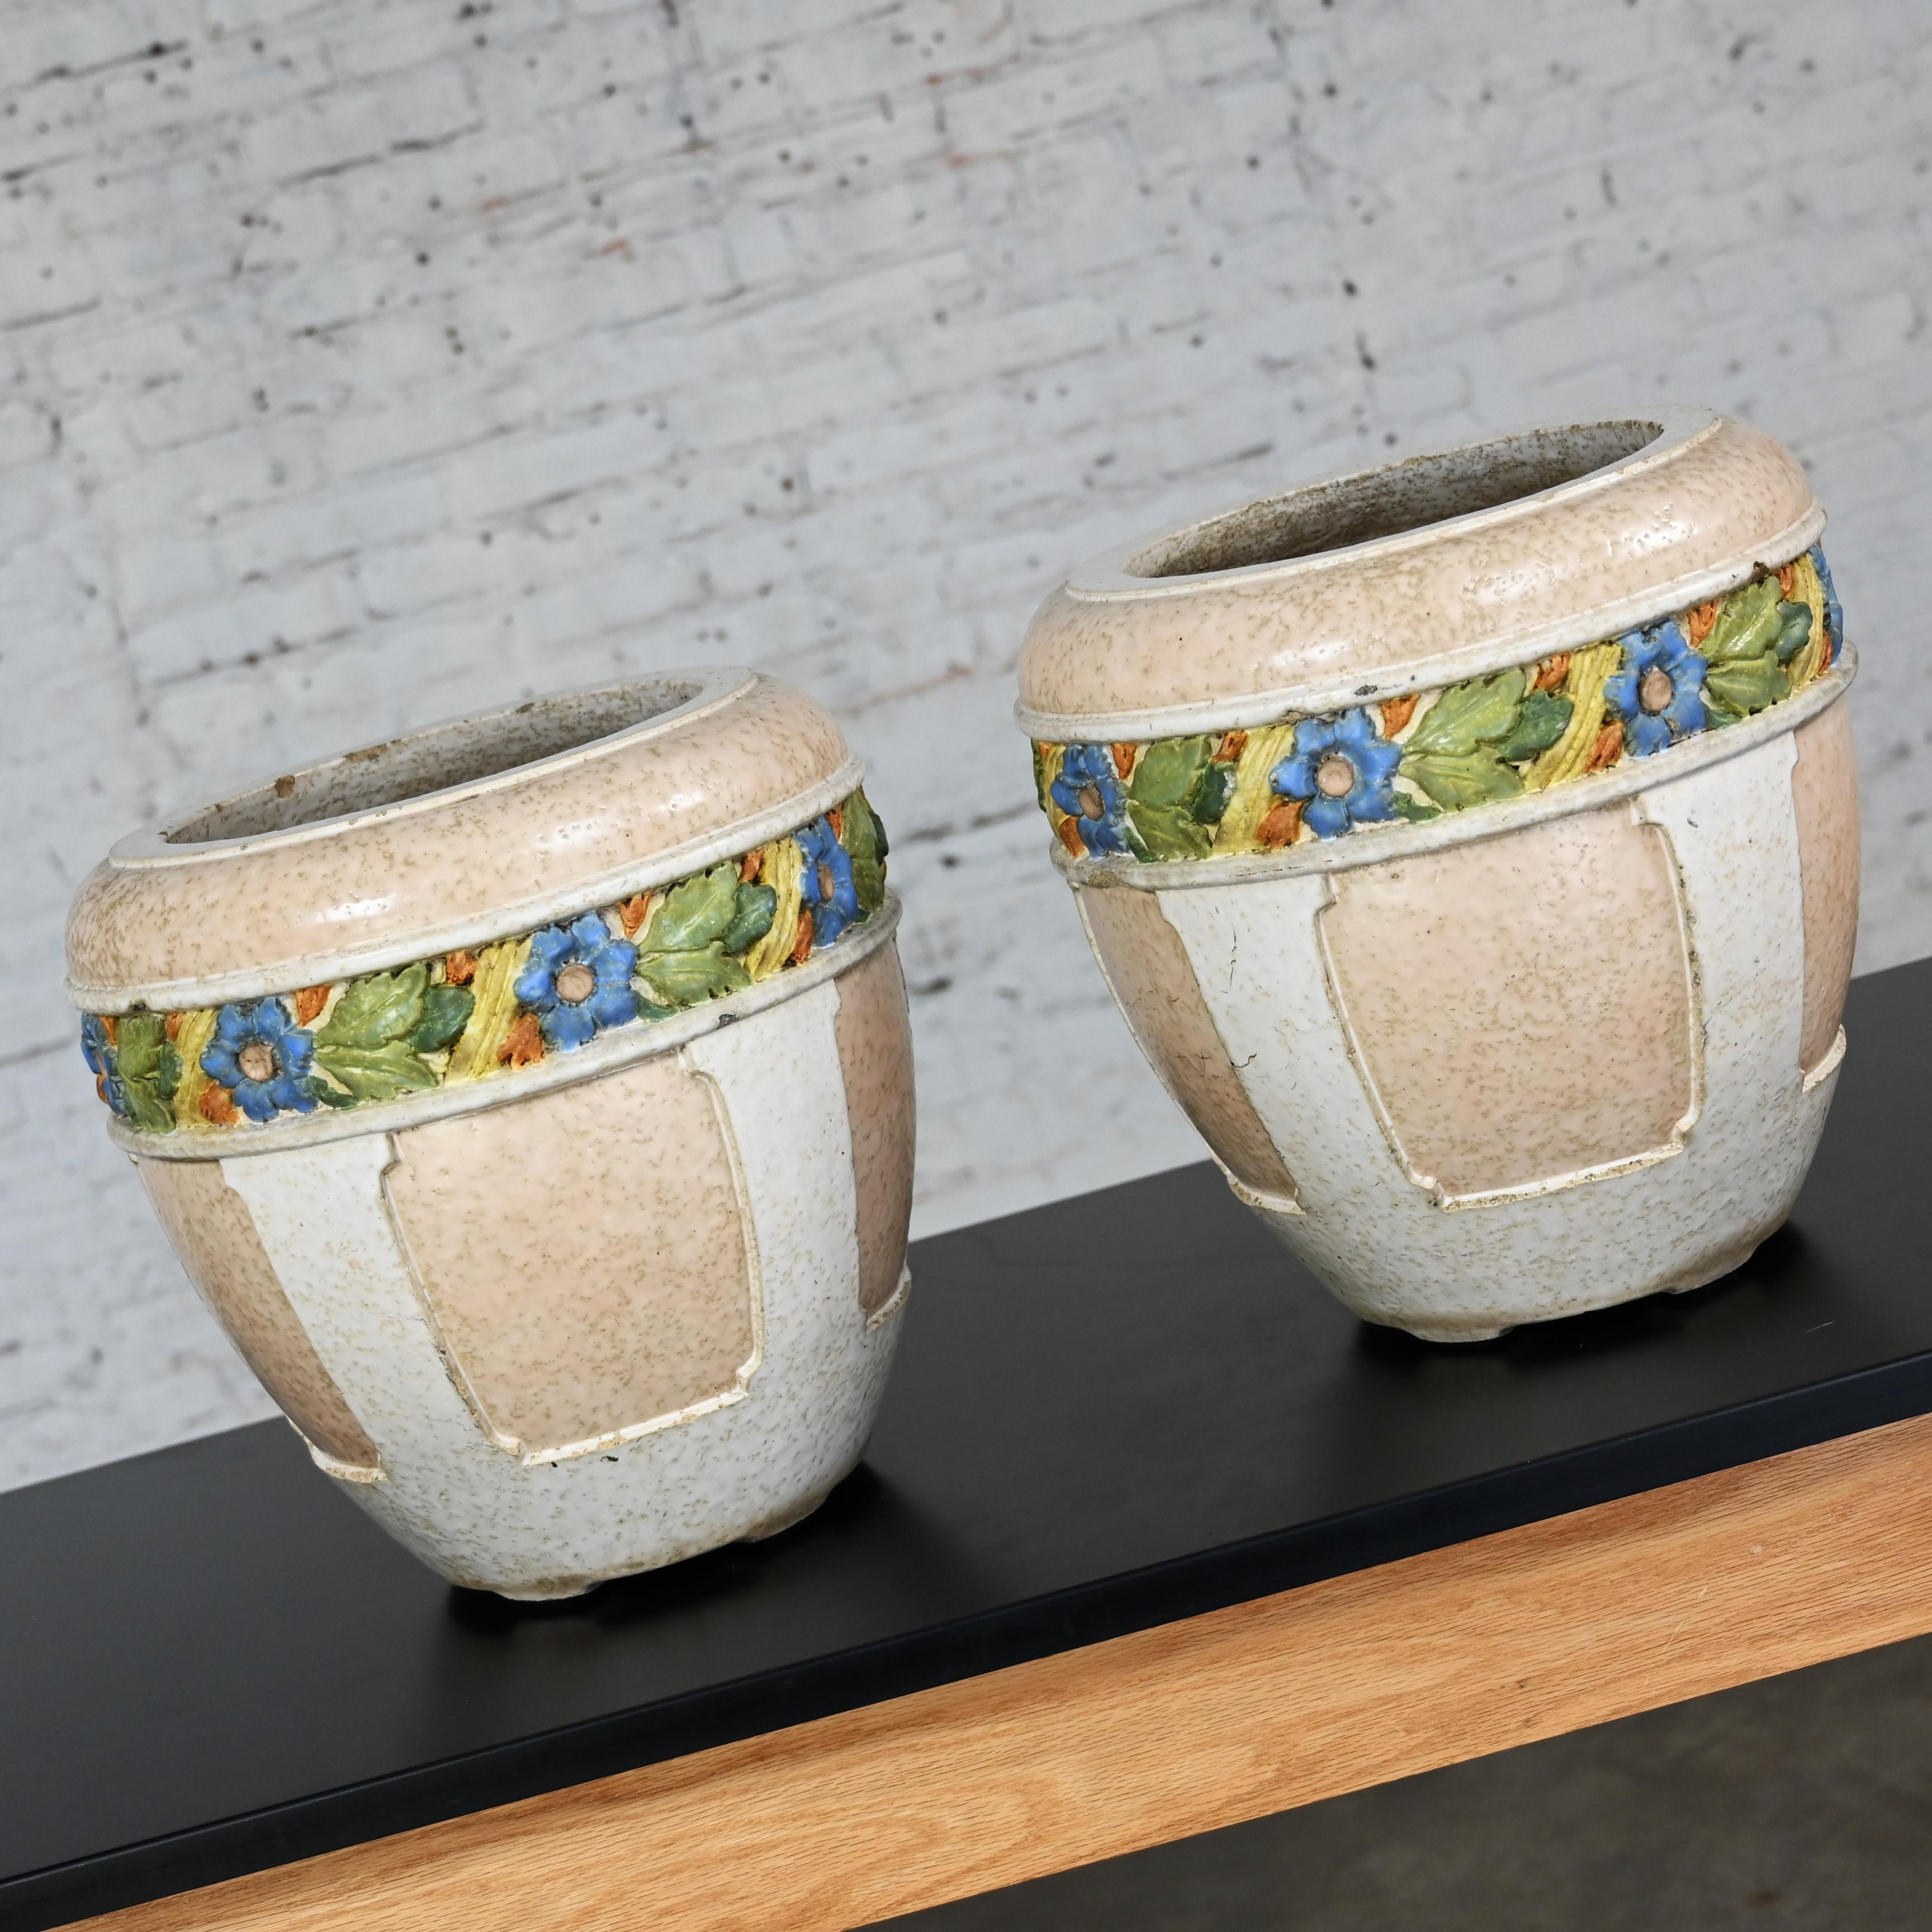 Lovely antique Architectural glazed terracotta planters with floral details, a pair. These pots are most likely made by one of the terracotta tile makers who supplied the gorgeous decorative tiles used on so many of the beautiful buildings of the